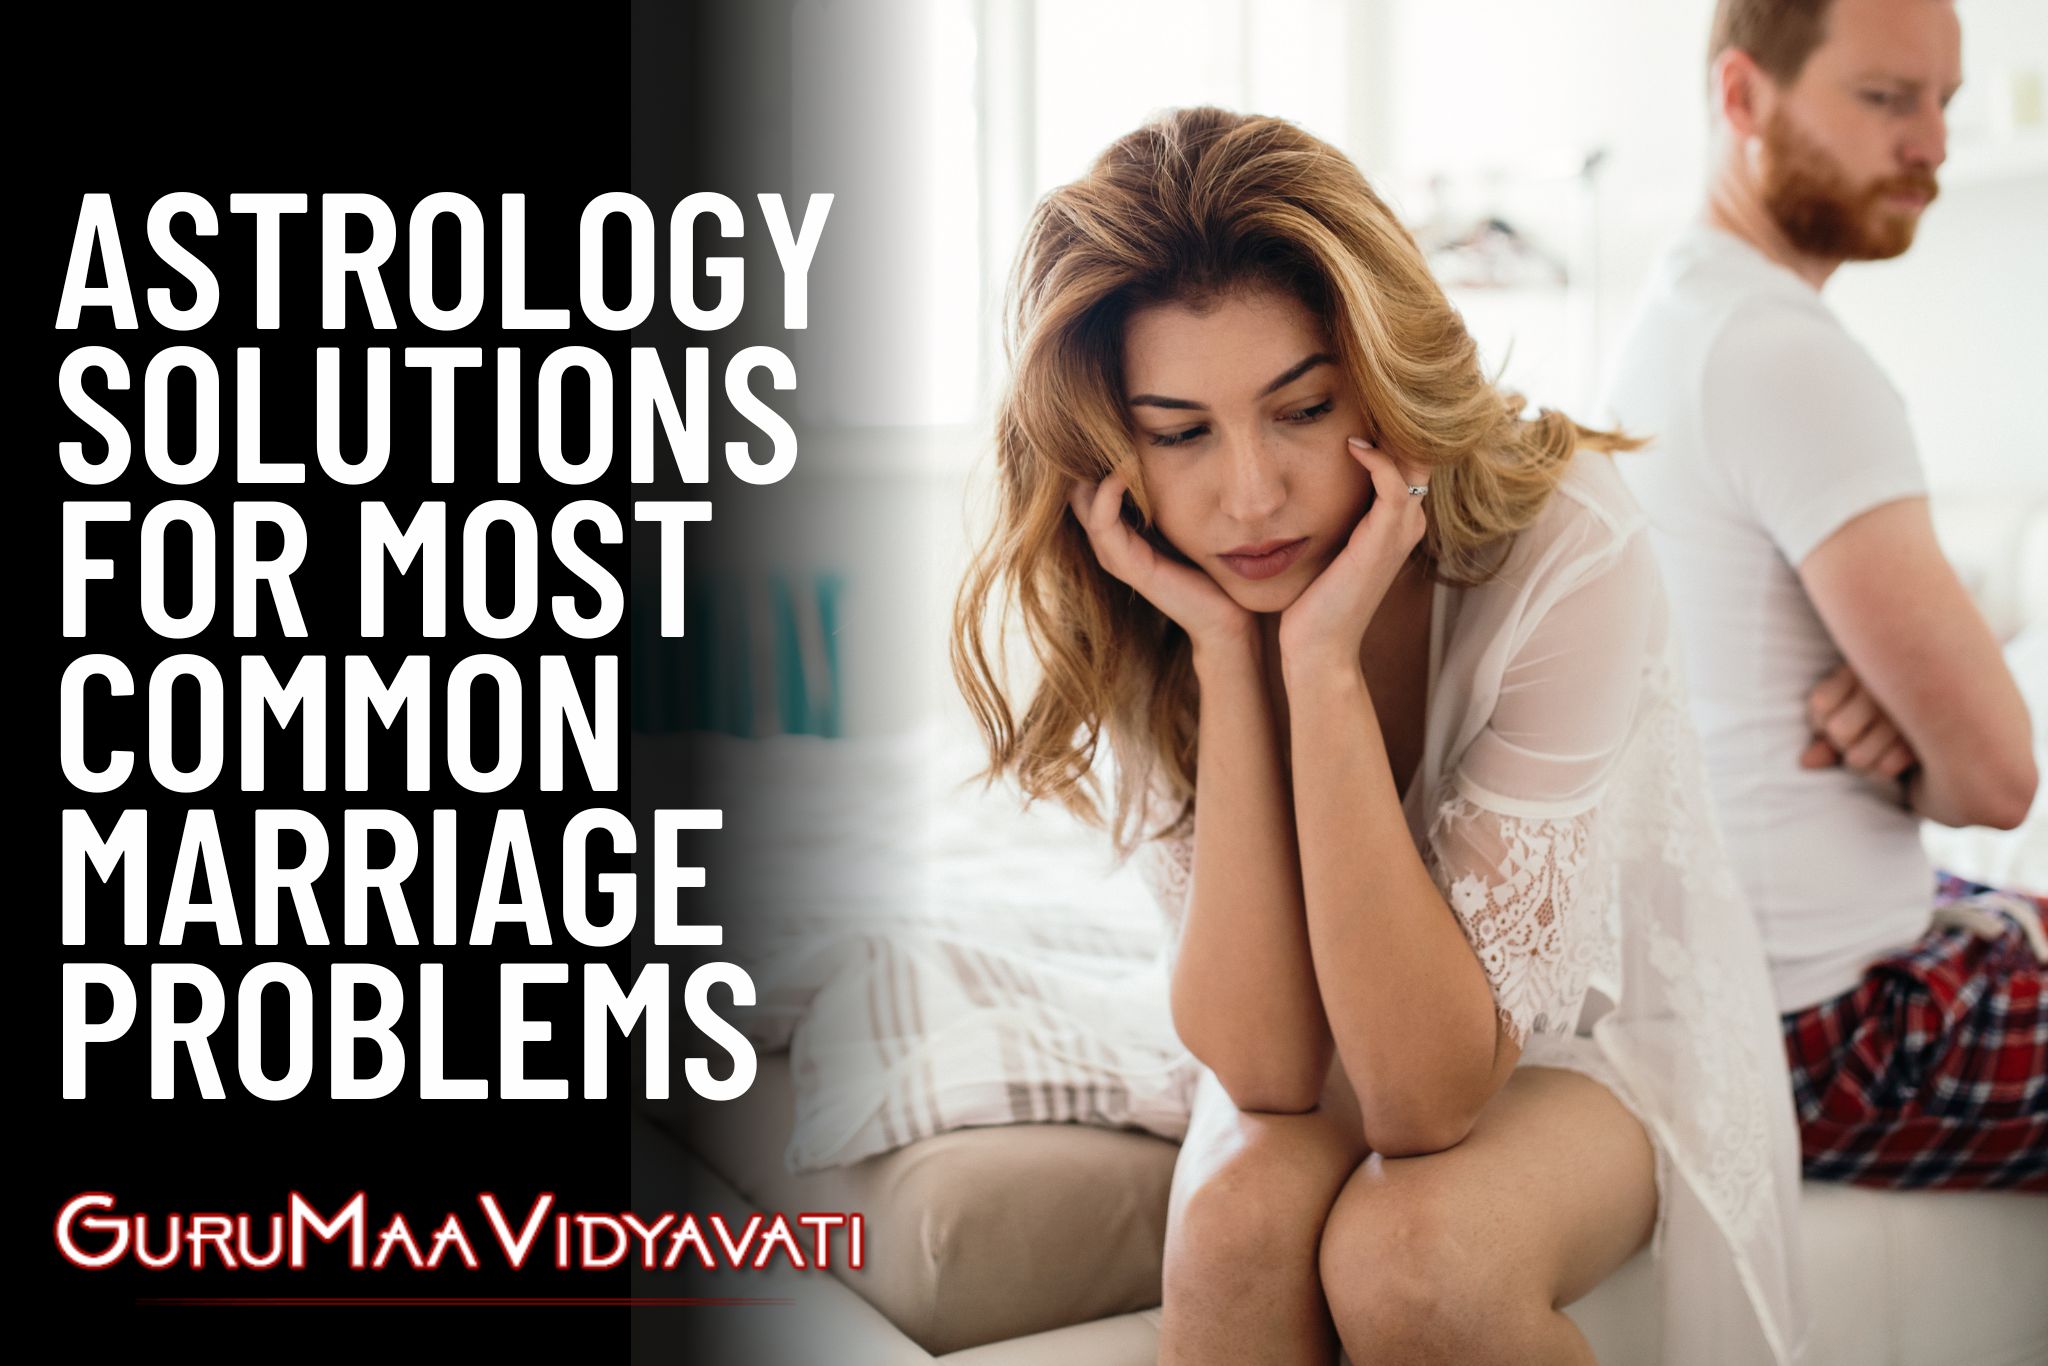 Astrology Solutions for Most Common Marriage Problems